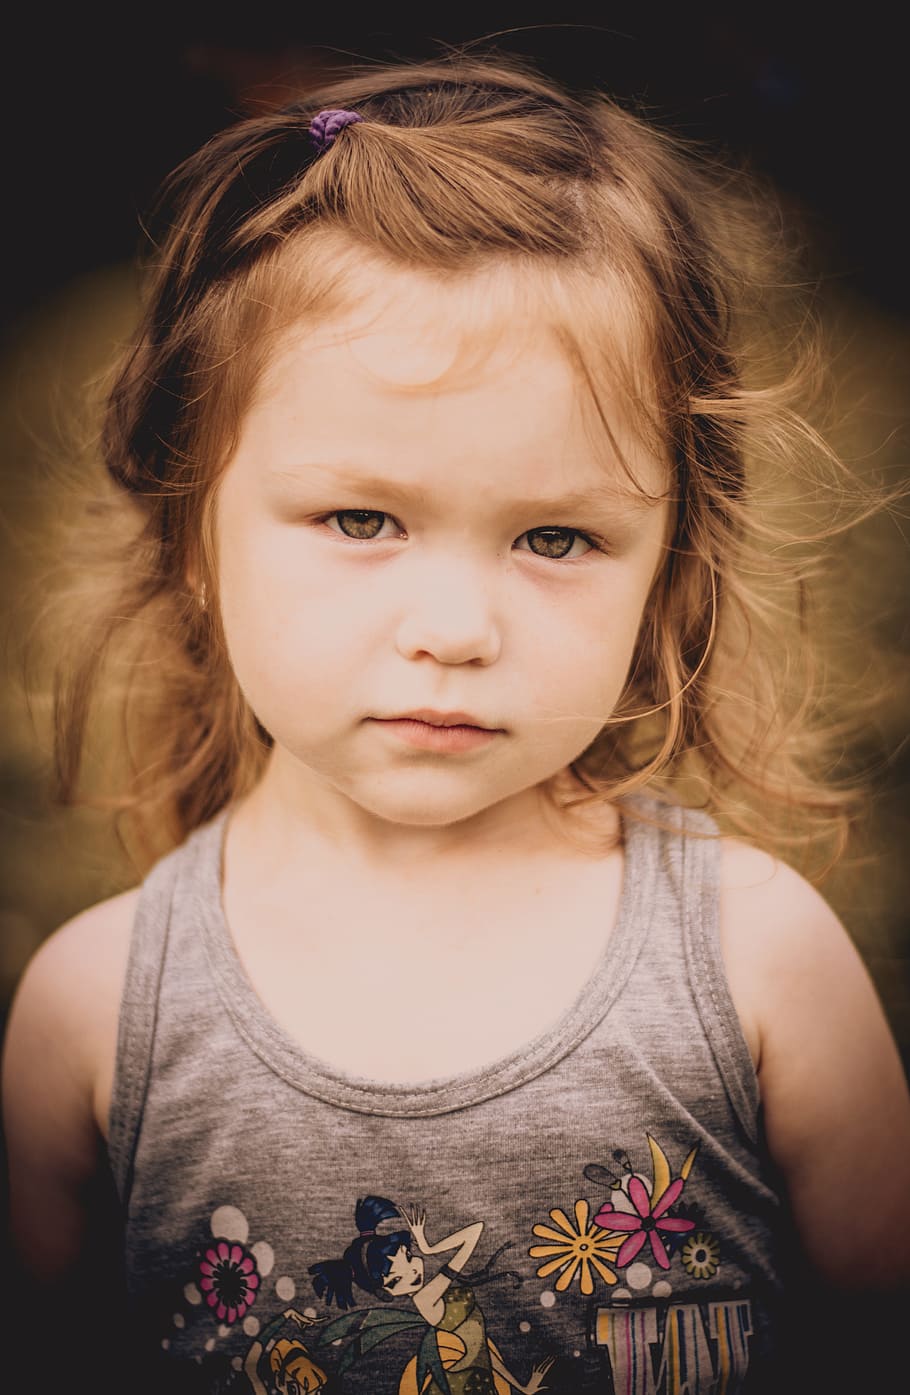 brown, hair girl, baby, kids, view, cute, small child, photographing children, child, a cute baby